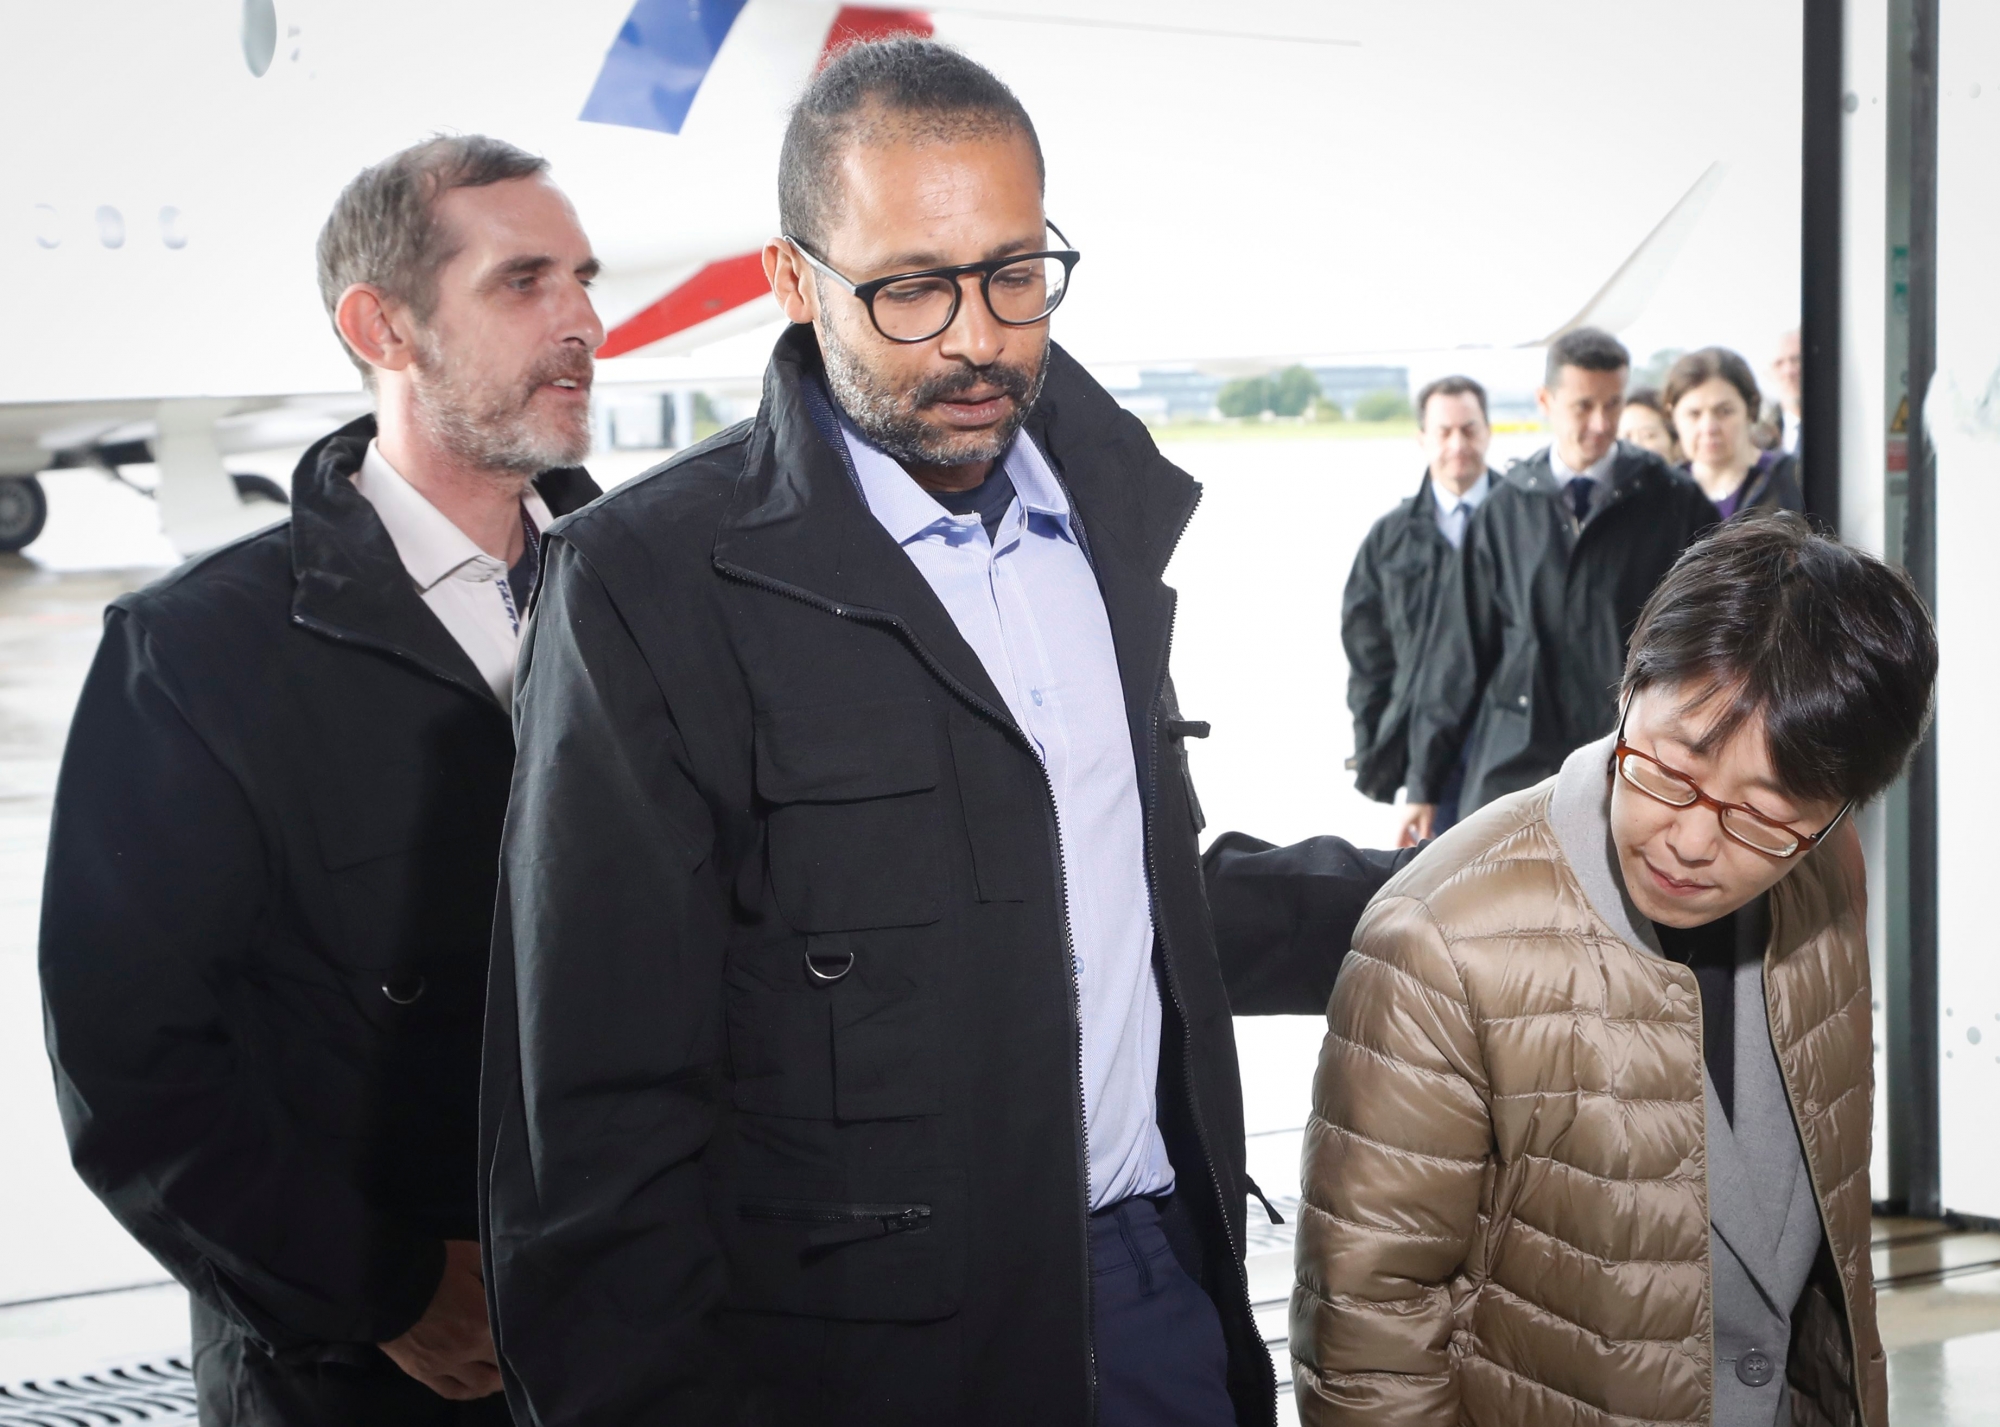 epa07562877 Freed French hostages Patrick Picque (L) and Laurent Lassimouillas (C) walk alongside a South Korean hostage (R) who has not been identified yet, upon their arrival at the Villacoublay airport, near Paris, France, 11 May 2019. According to the French presidency, the French army has released four hostages during an intervention in northern Burkina Faso. Two are French, one American and one South Korean citizen. Two French soldiers are reported to have been killed in the operation to free the hostages. The two French citizens were kidnapped on 01 May 2018 in Benin.  EPA/FRANCOIS GUILLOT / POOL  MAXPPP OUT FRANCE BURKINA FASO HOSTAGES